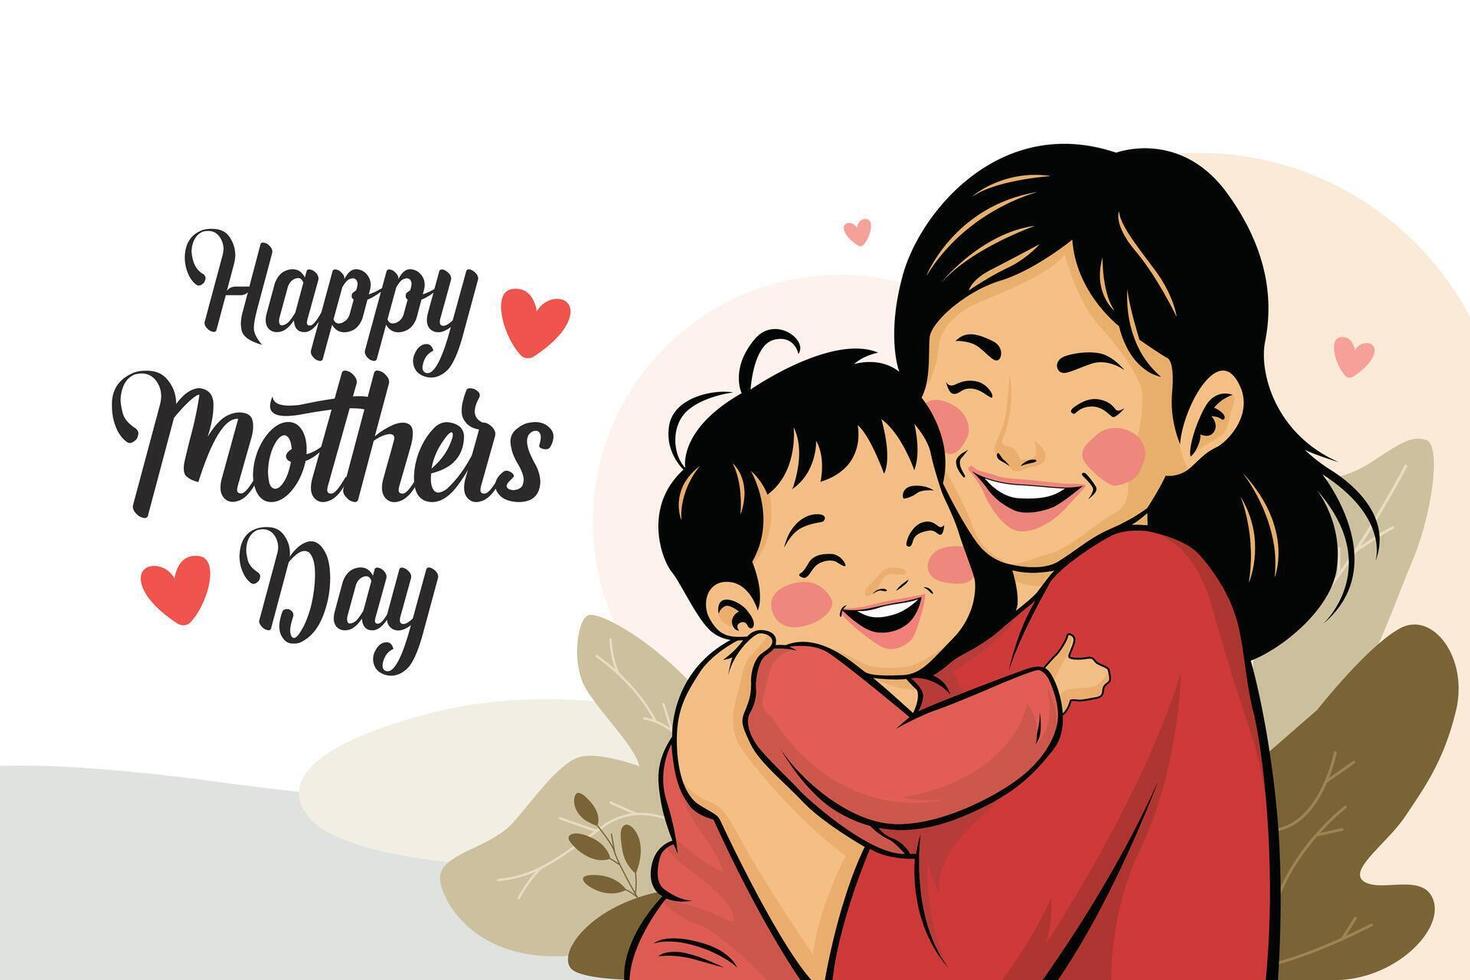 Illustration Of Mother Holding Son In Arms. Happy Mother's Day illustration. vector